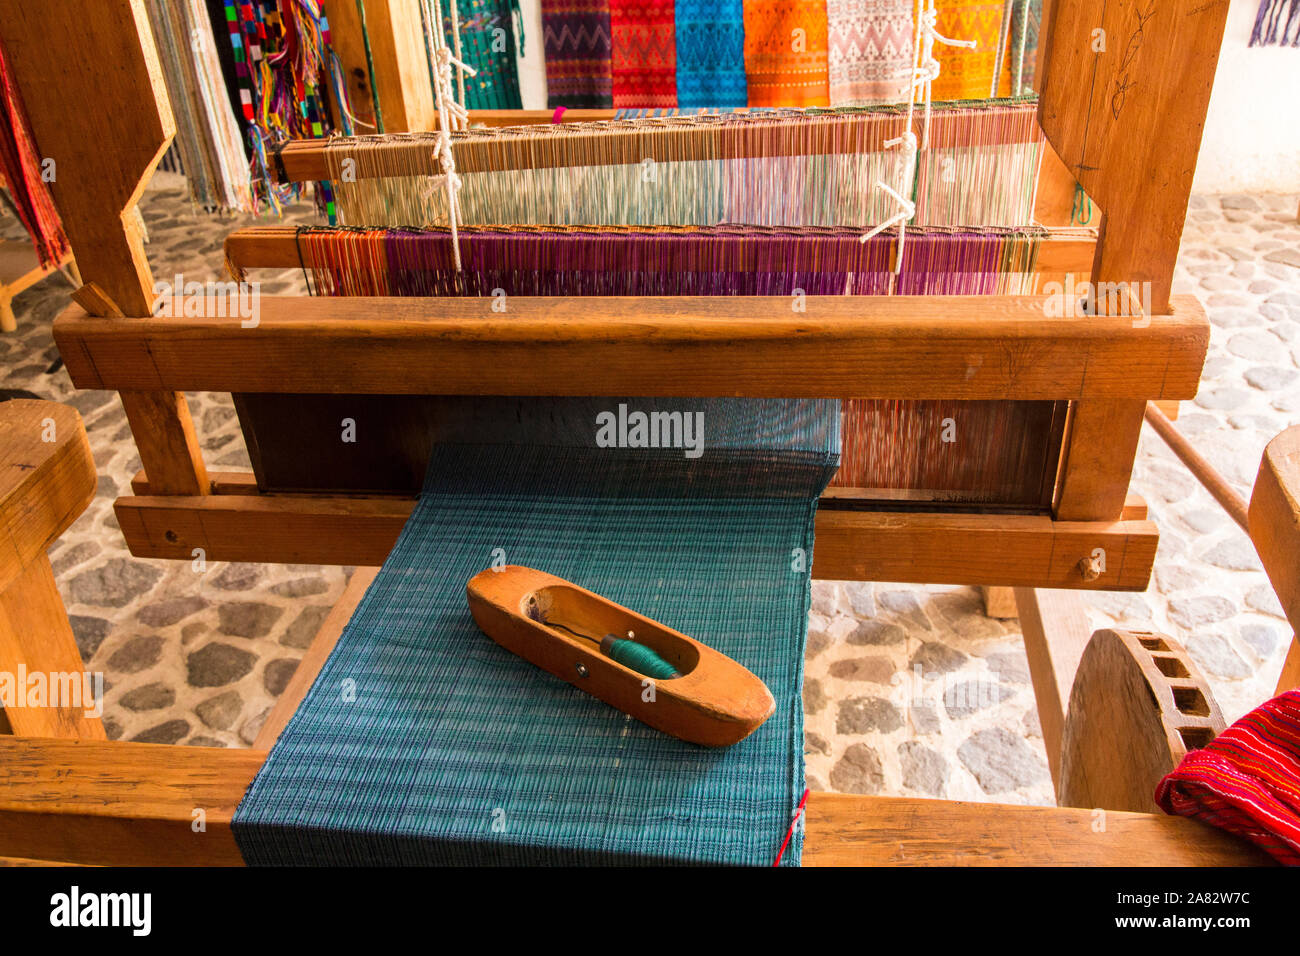 Detail of a wooden weaving shuttle on the woven cloth on a foot-operated wooden loom in San Antonio Palopó, Guatemala. Stock Photo